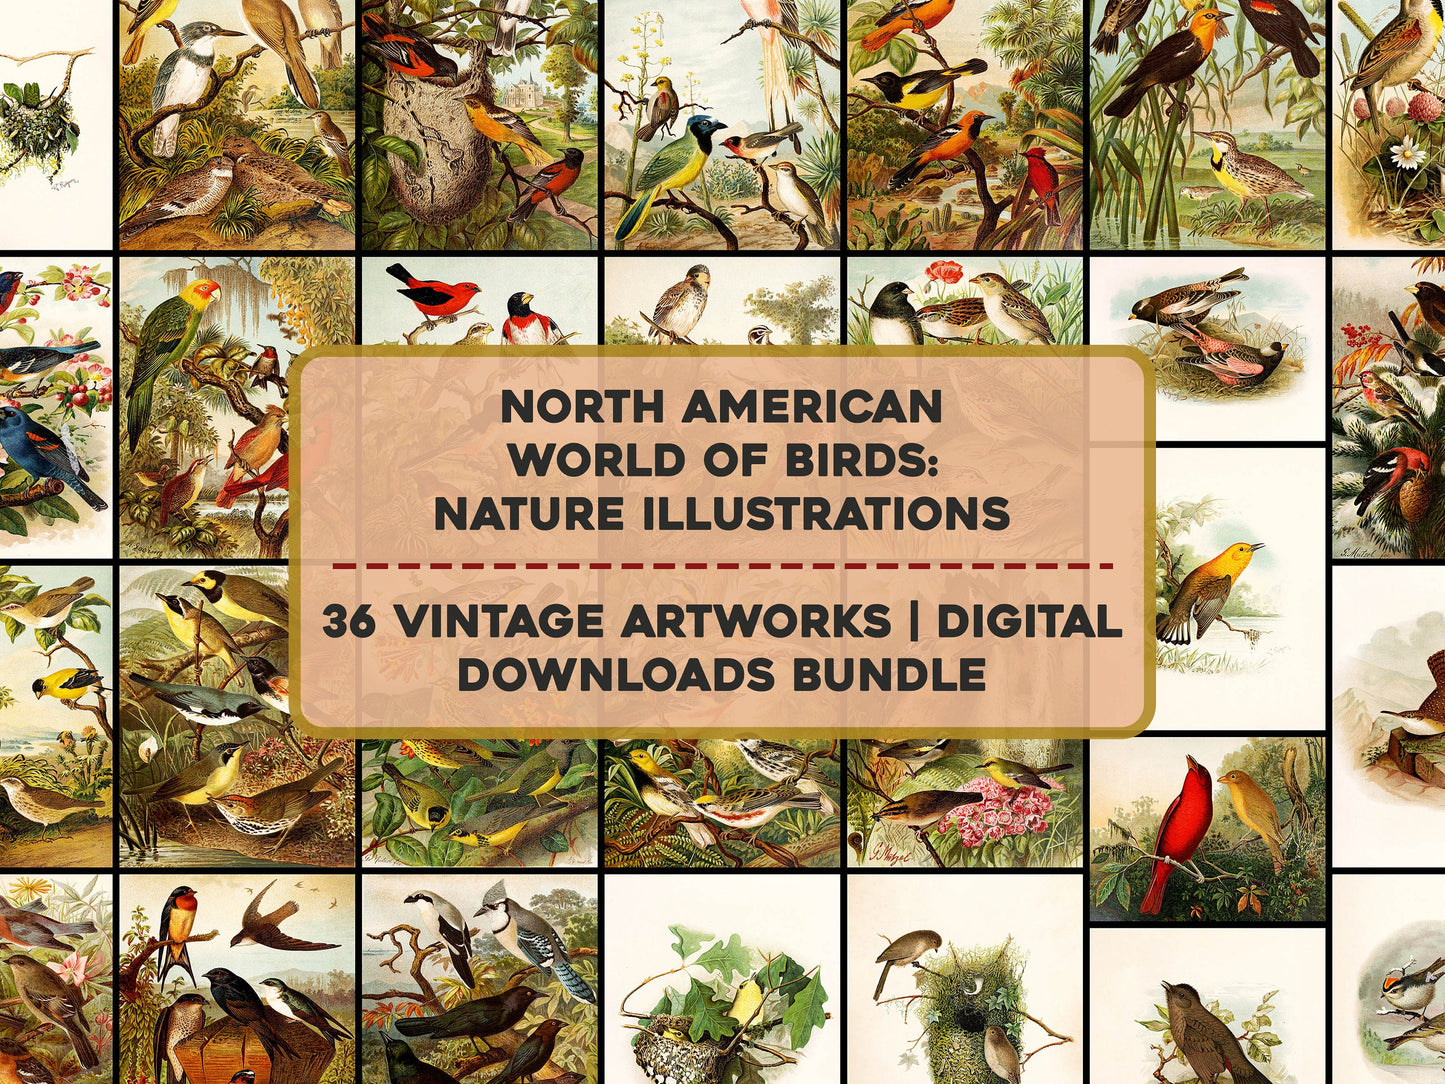 North American World of Birds [36 Images]